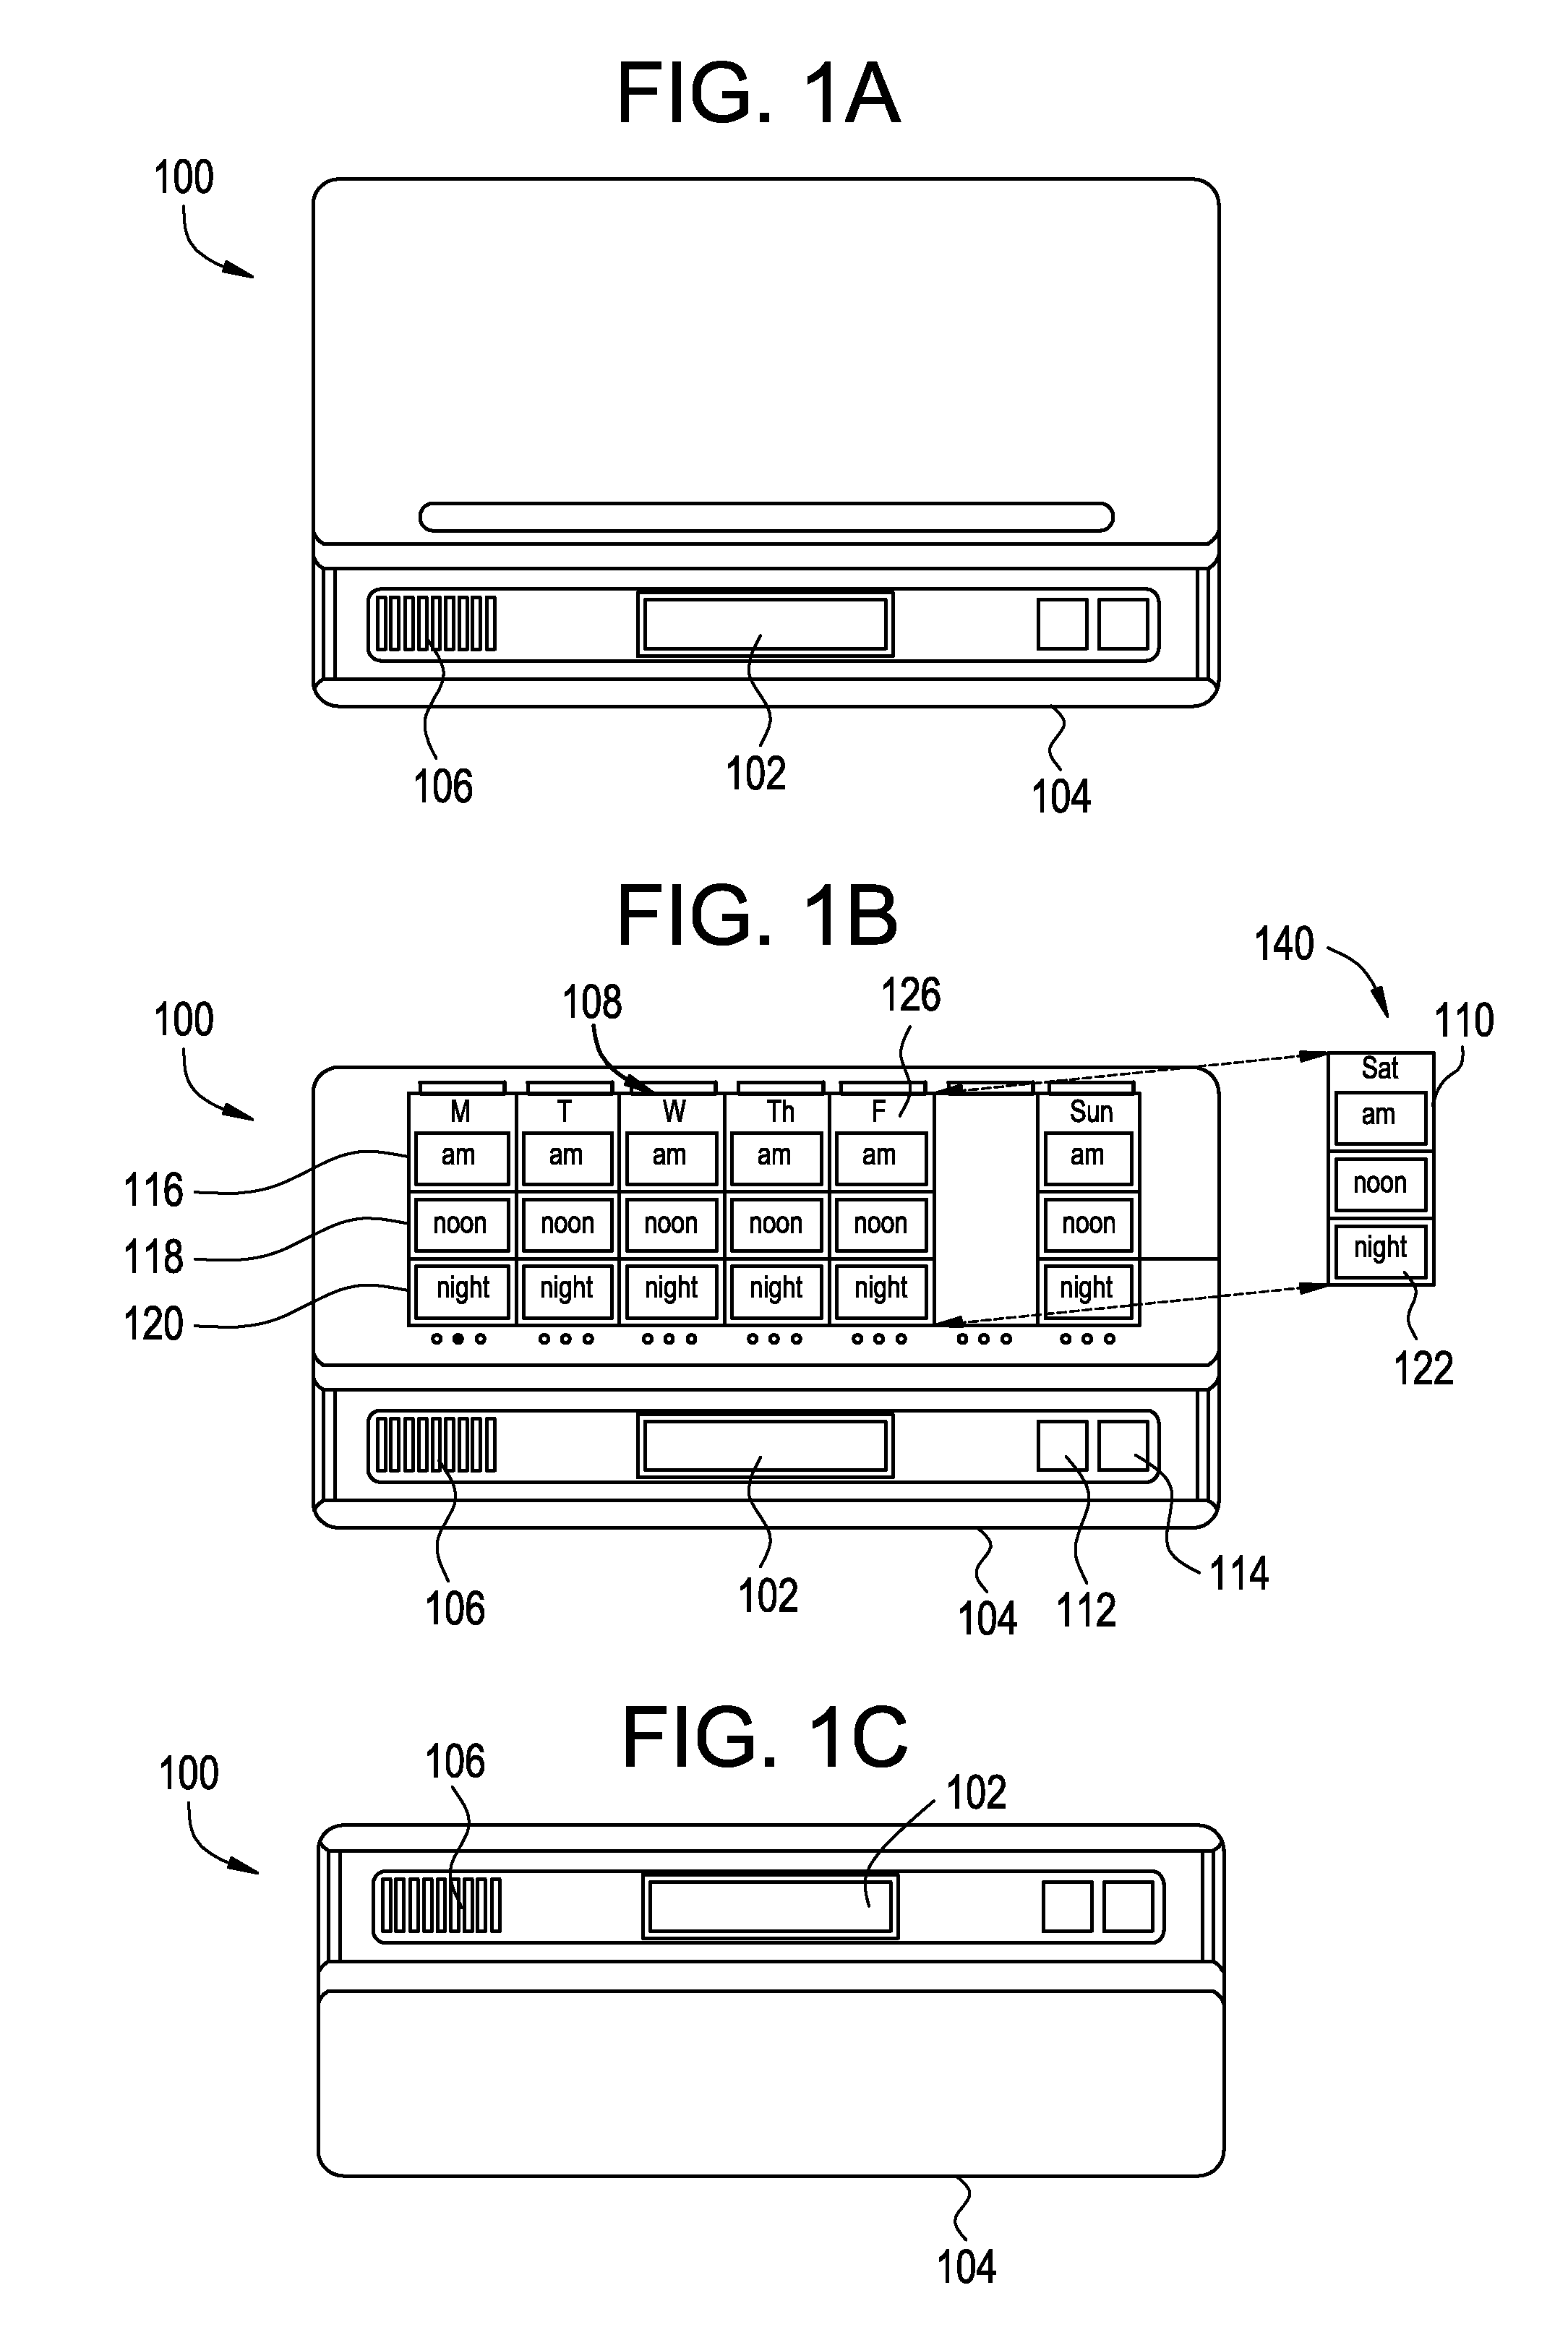 Medication Dispenser with Integrated Monitoring System